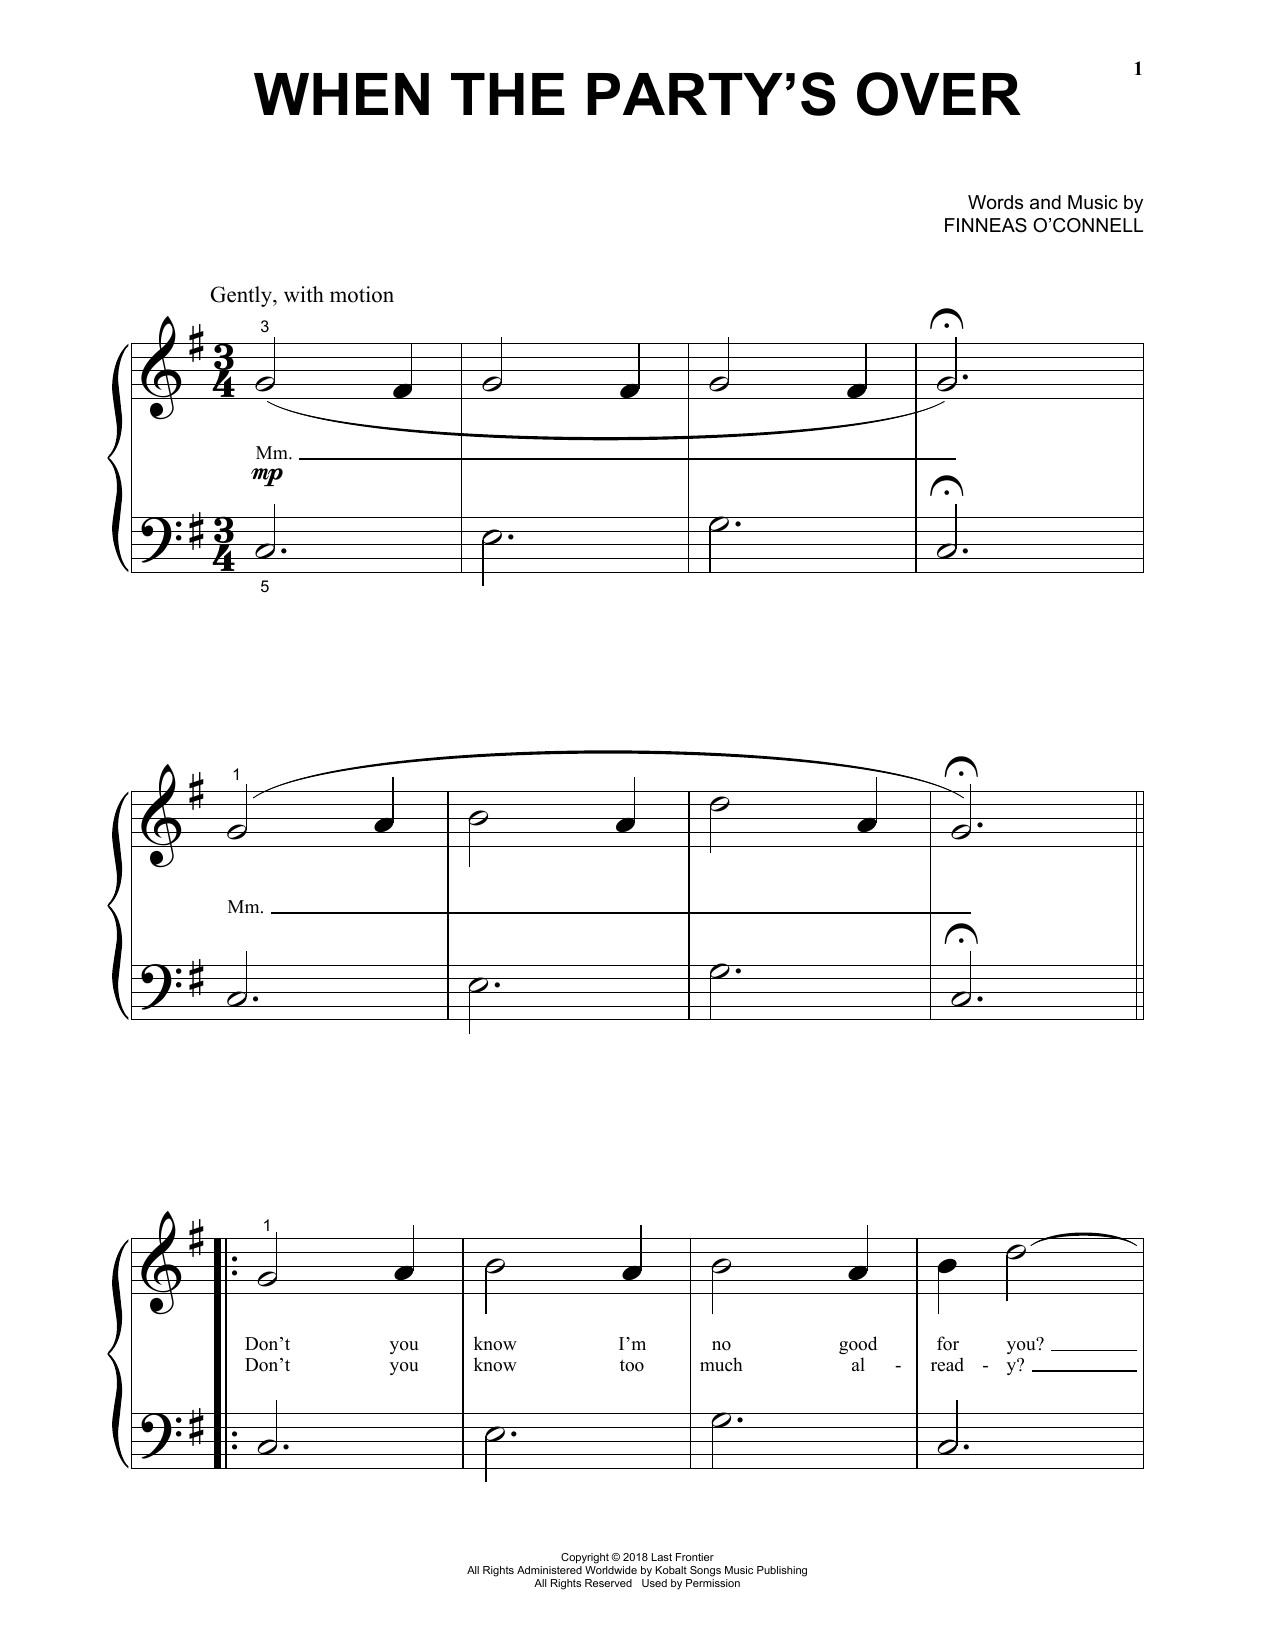 Download Billie Eilish when the party's over Sheet Music